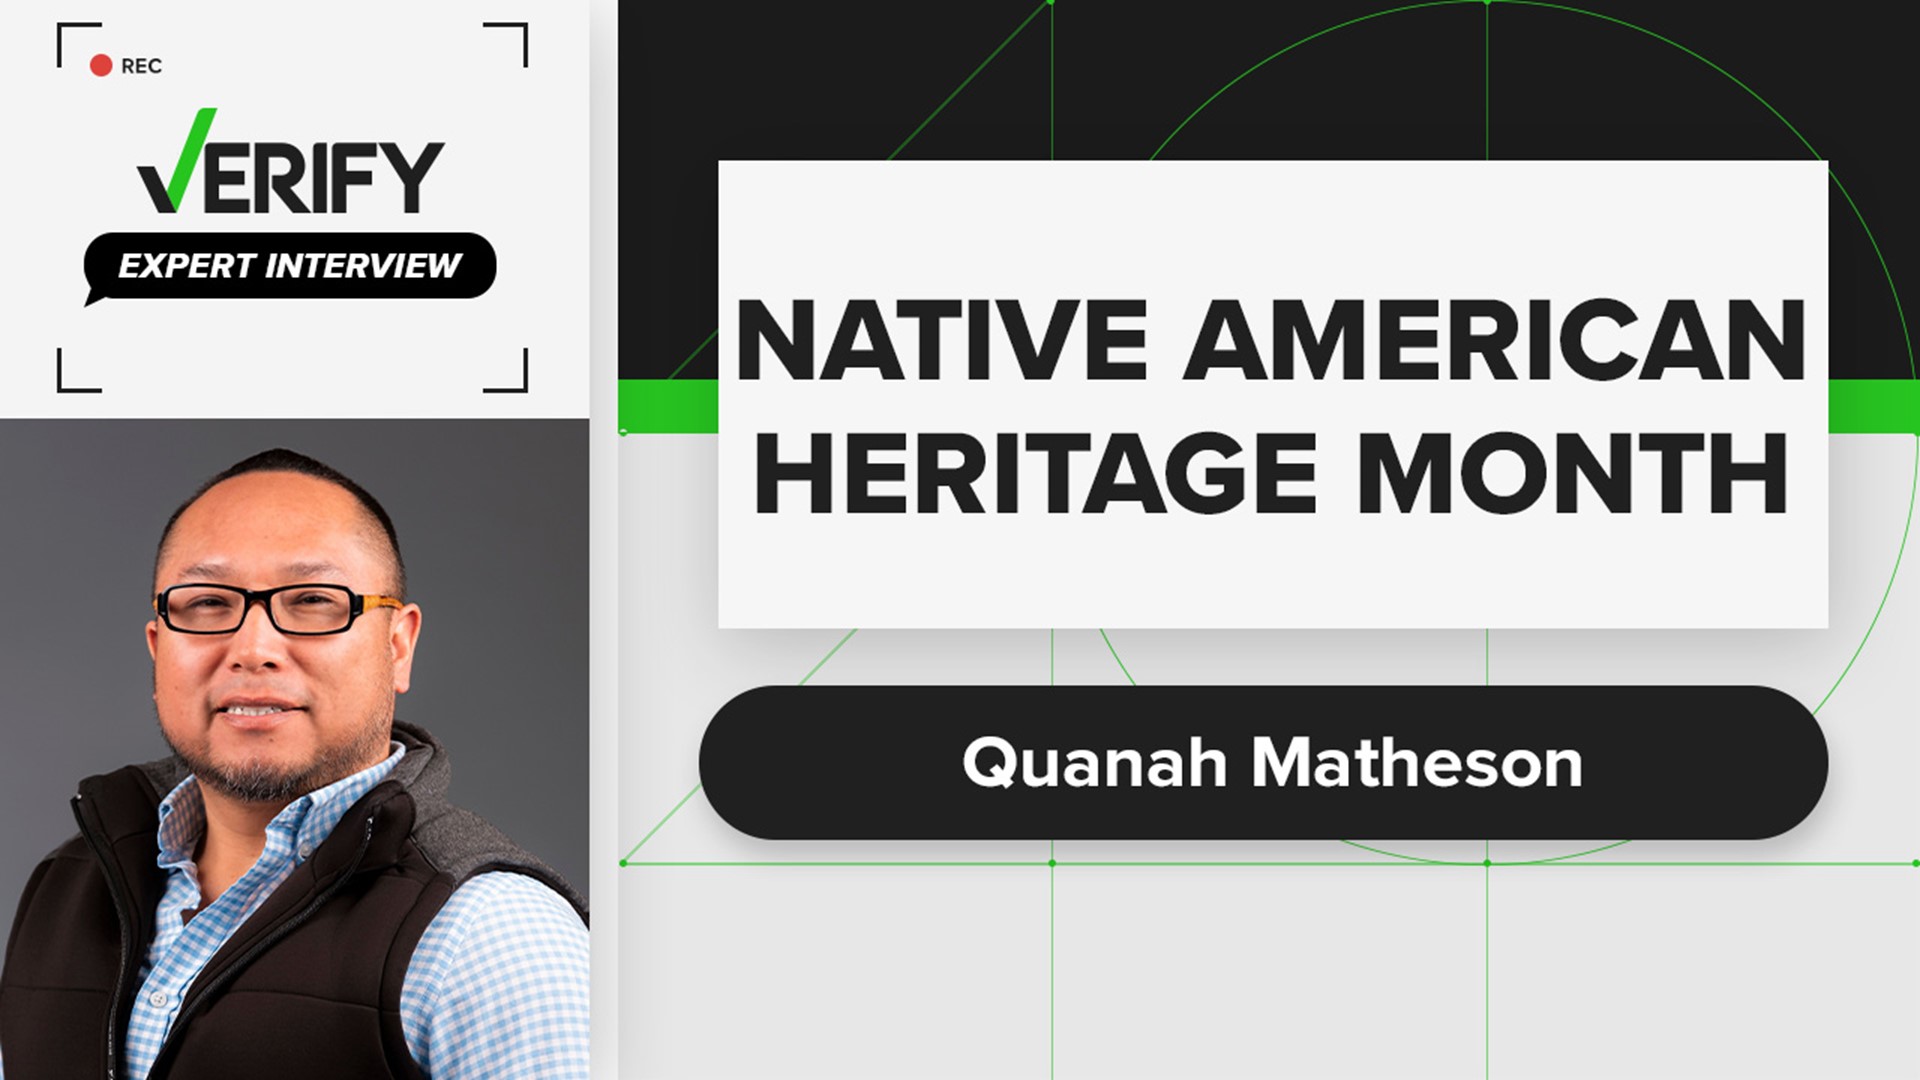 Quanah Matheson delves into the history behind Native American Heritage month and culture, language, traditions and complex history of Native Americans.